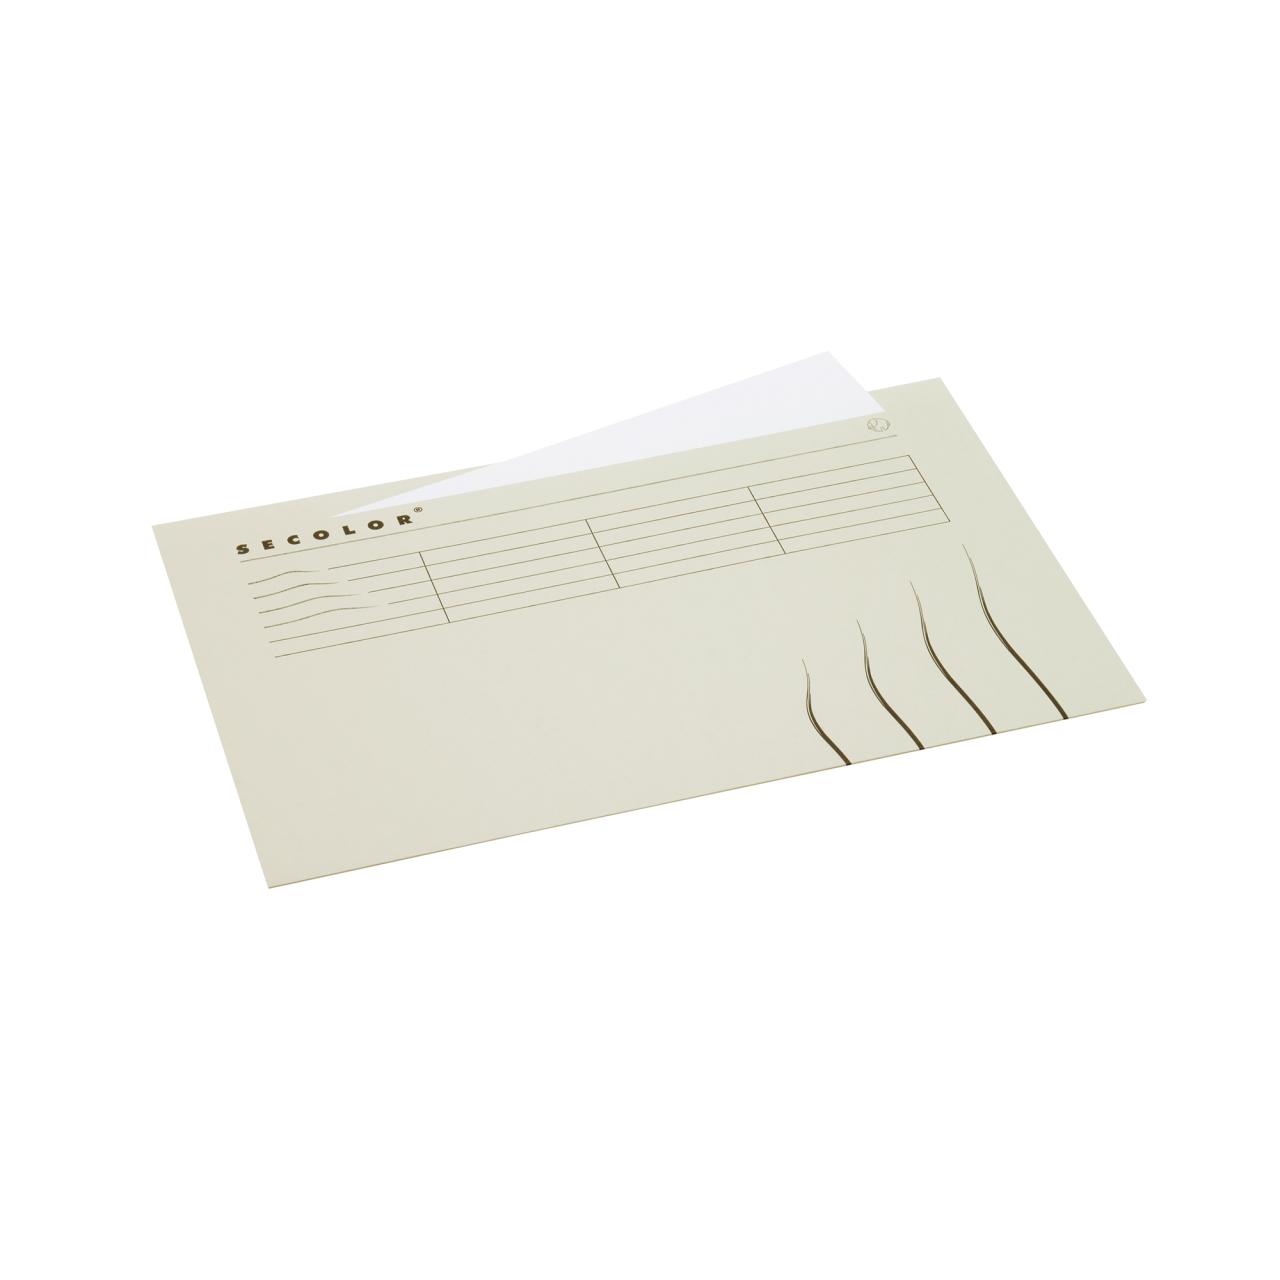 Secolor File Folder with Top Tab Edge, Folio, 100% recycled cardboard, FSC® 